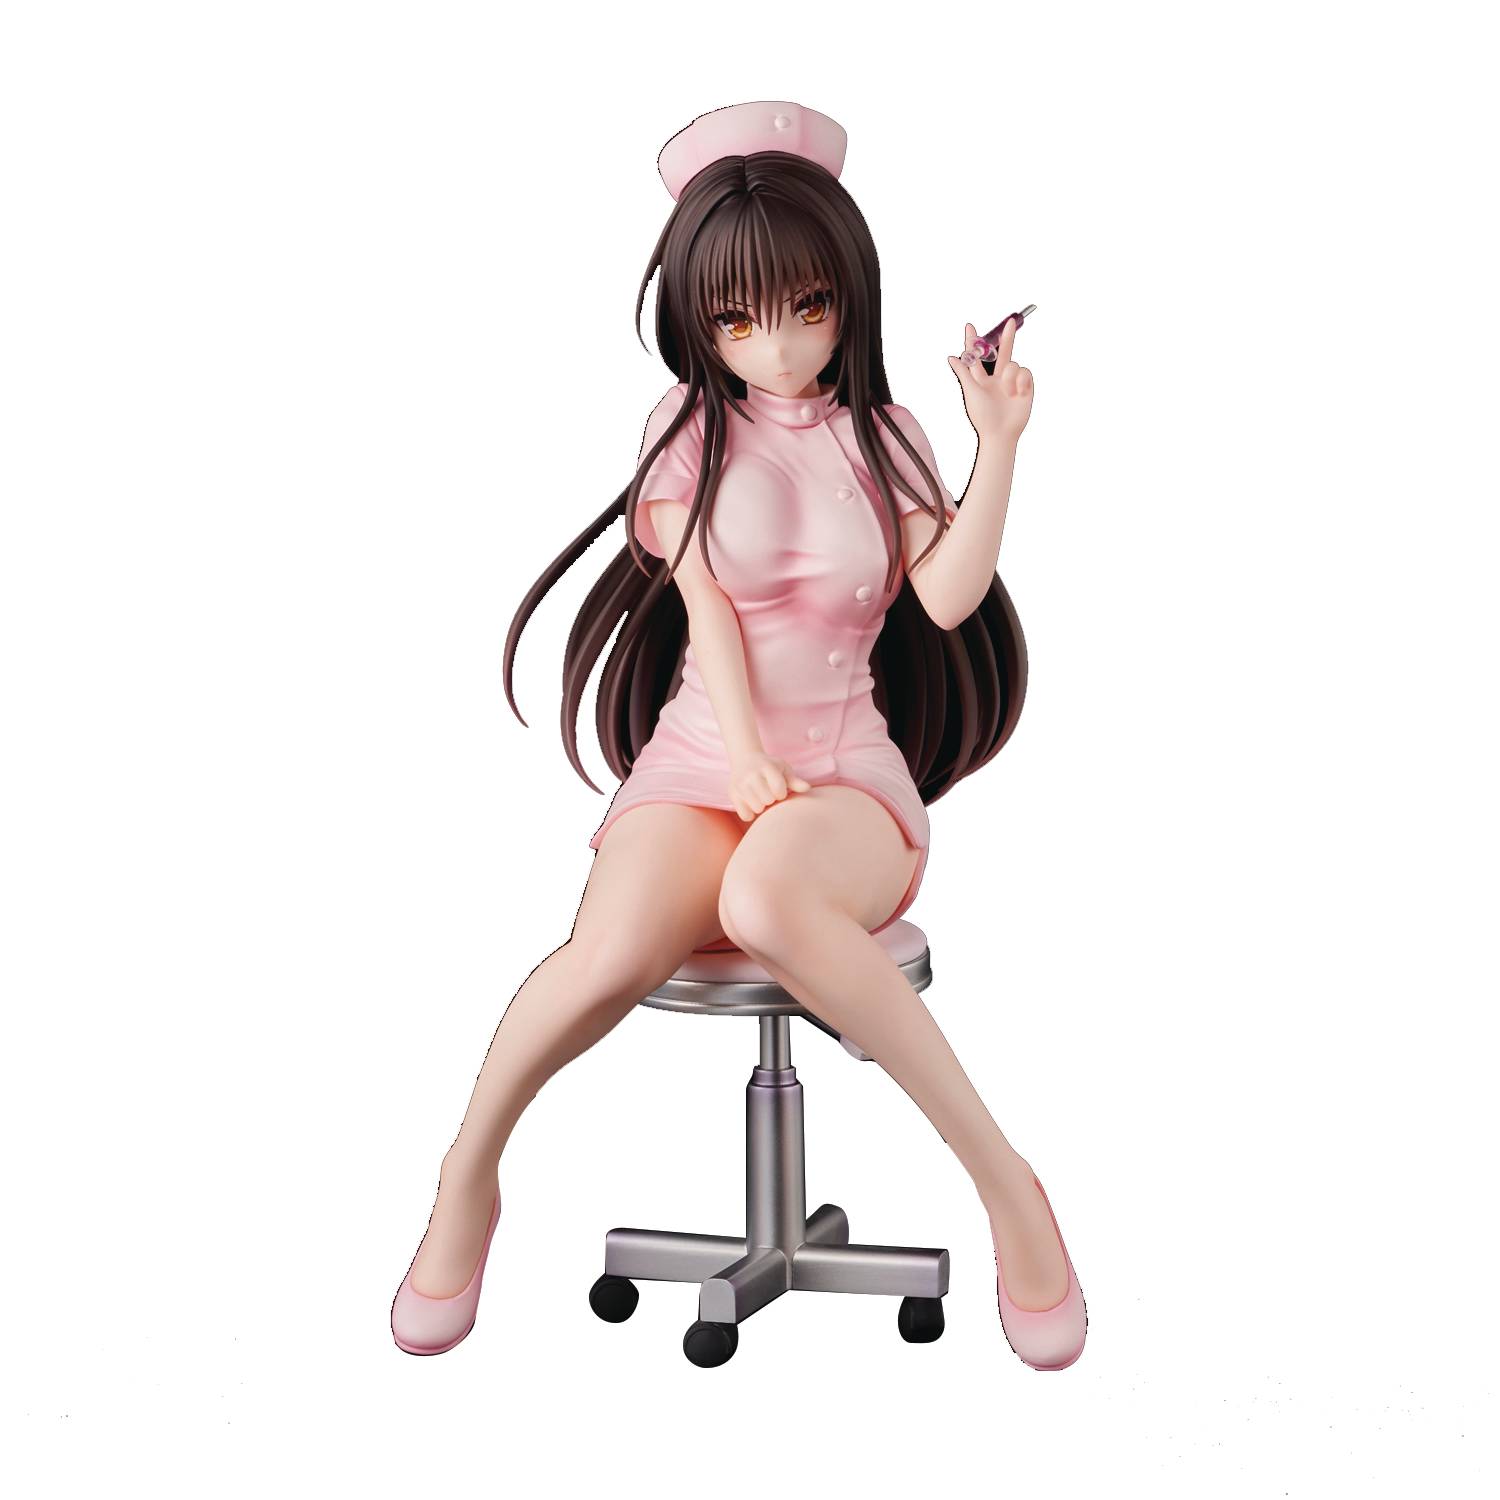 antwinette johnson recommends to love ru darkness sexy pic